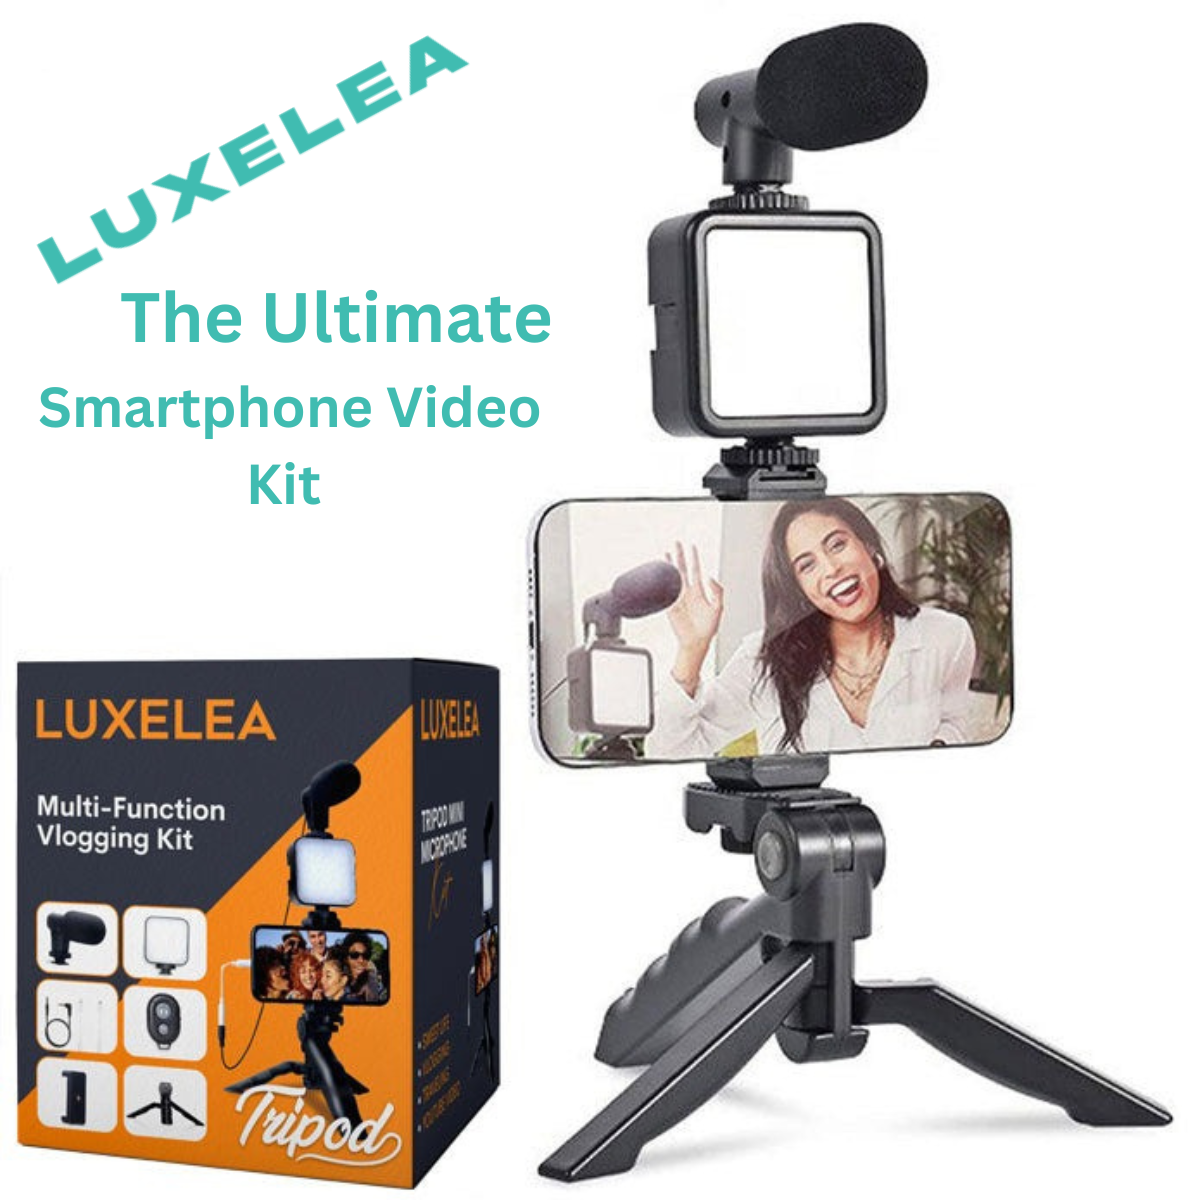 The LUXELEA 5 in 1 Smartphone  Vlogging Kit. 🎬 (Save $30)